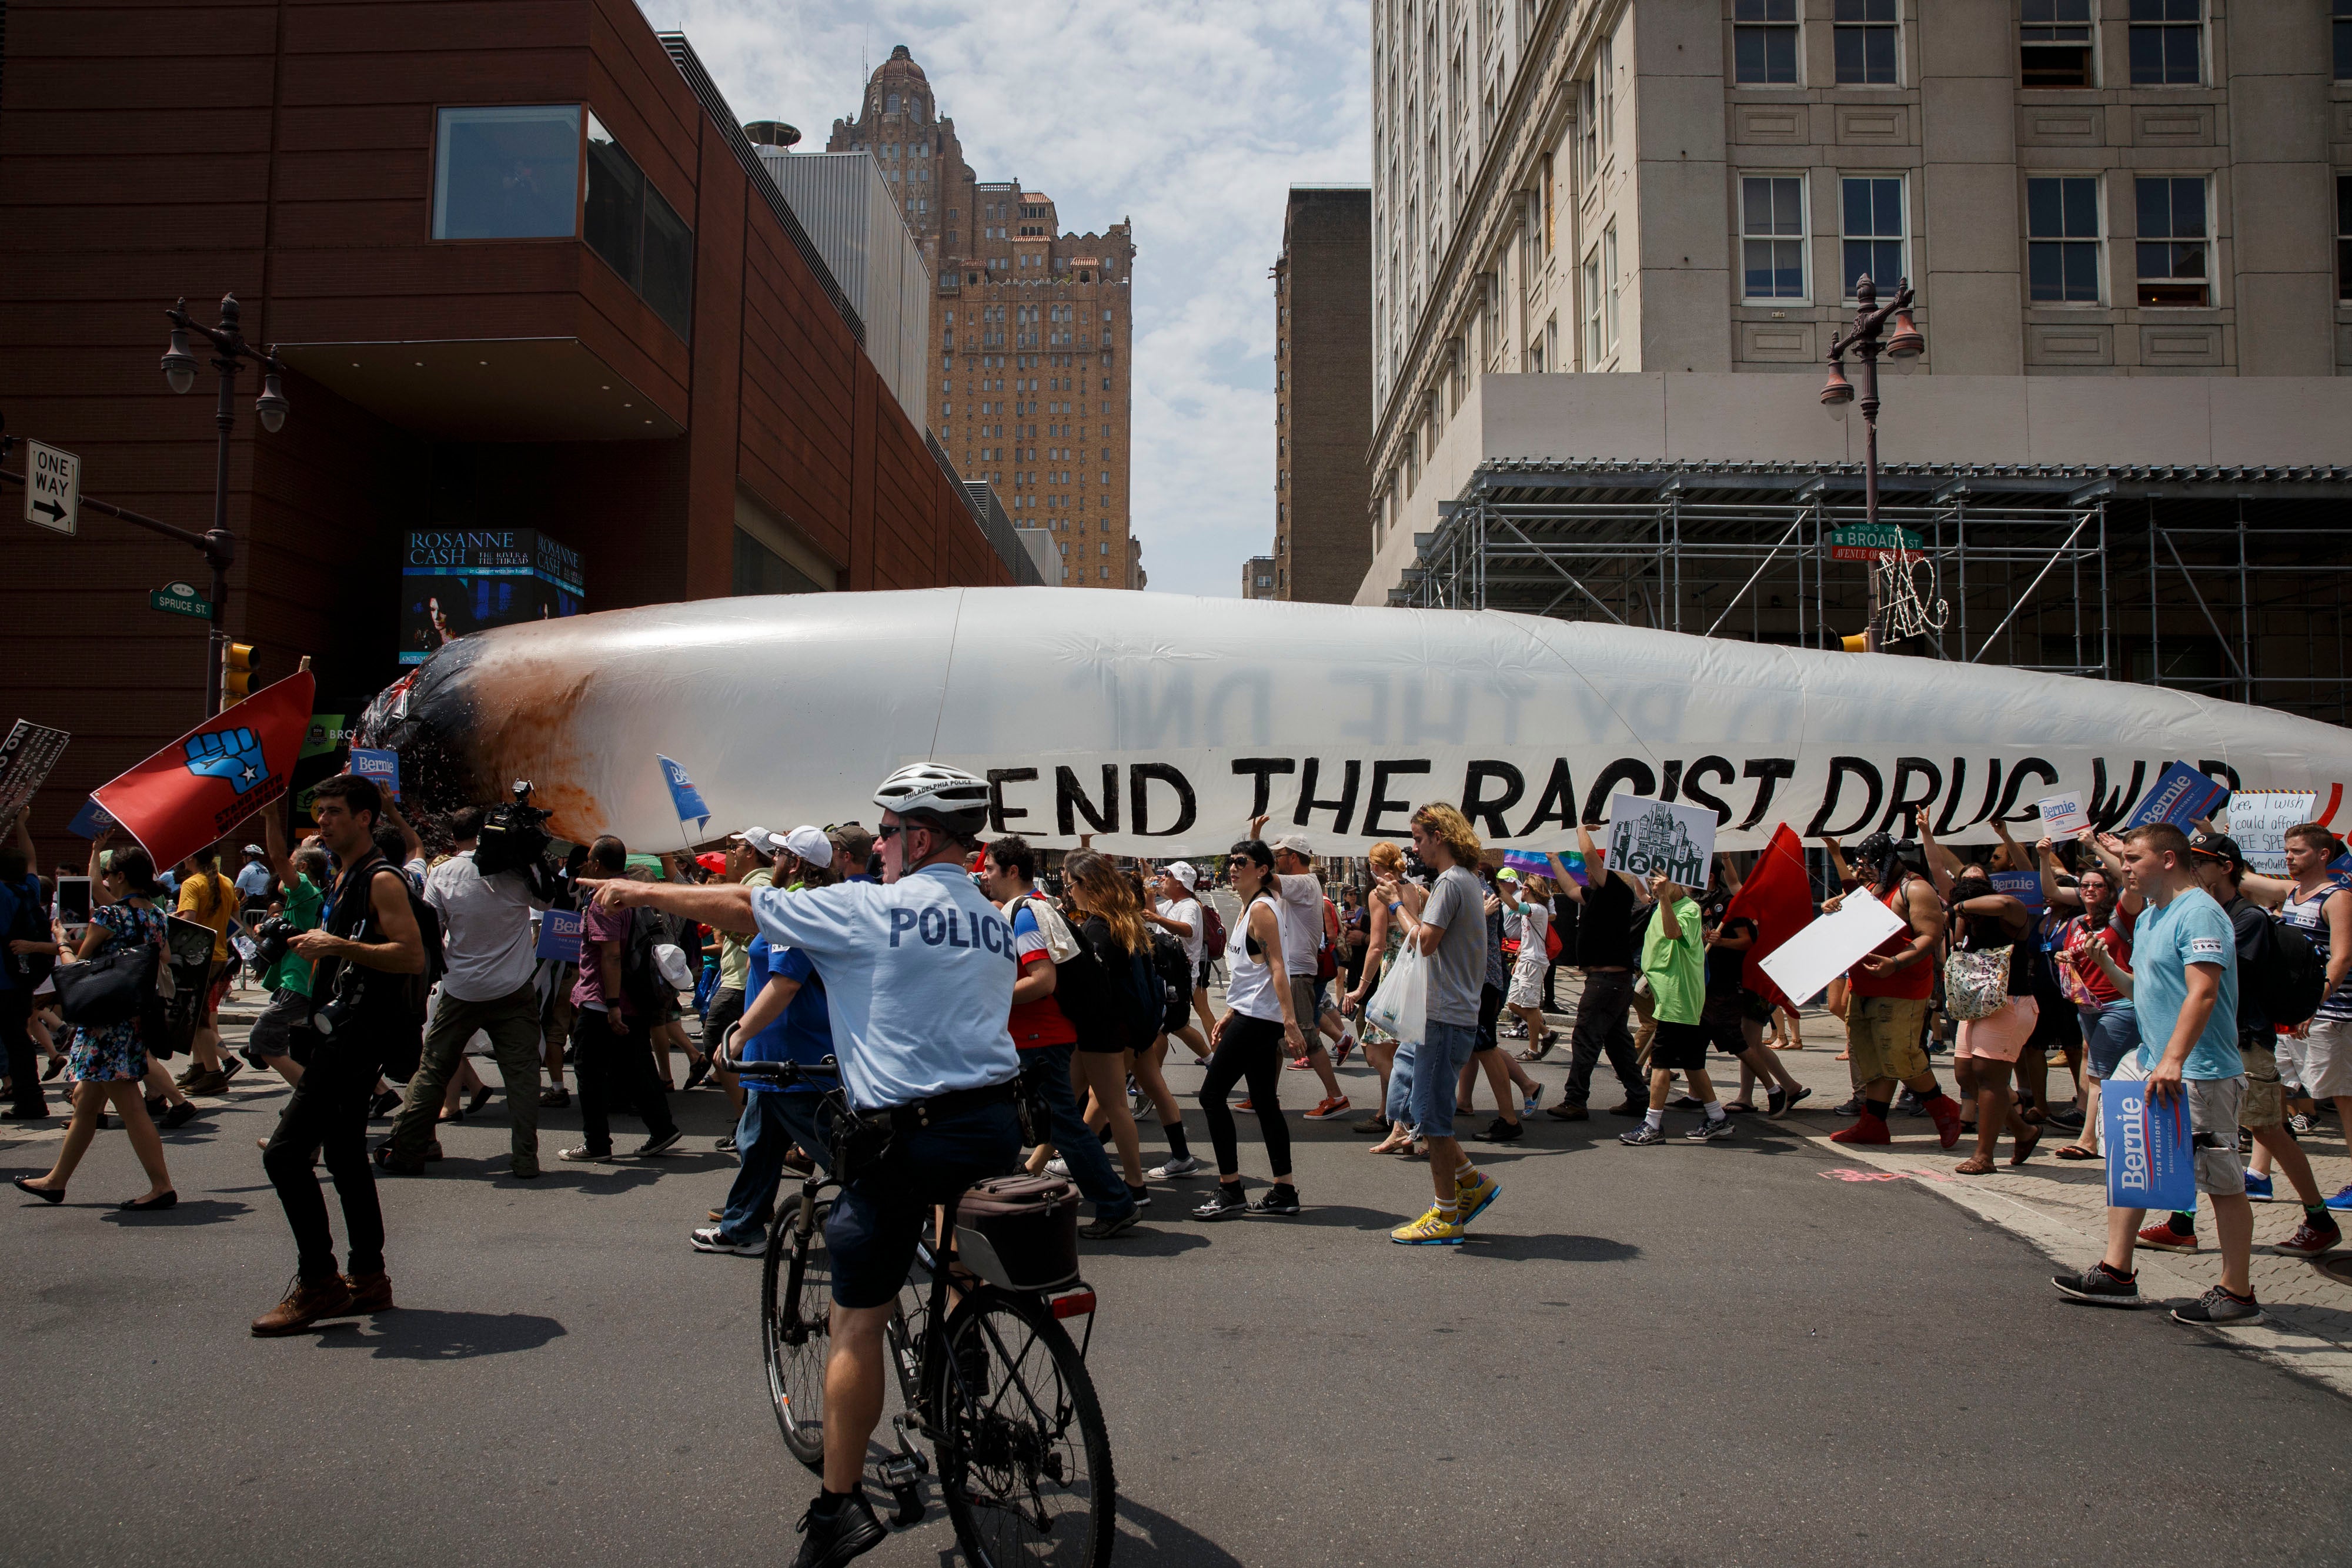 People march with a 51-foot-long marijuana joint protesting the "racist drug war" and holding signs in support of former Democratic presidential candidate Bernie Sanders during a protest at the 2016 Democratic National Convention, July 25, 2016 in Philadelphia, Pennsylvania.